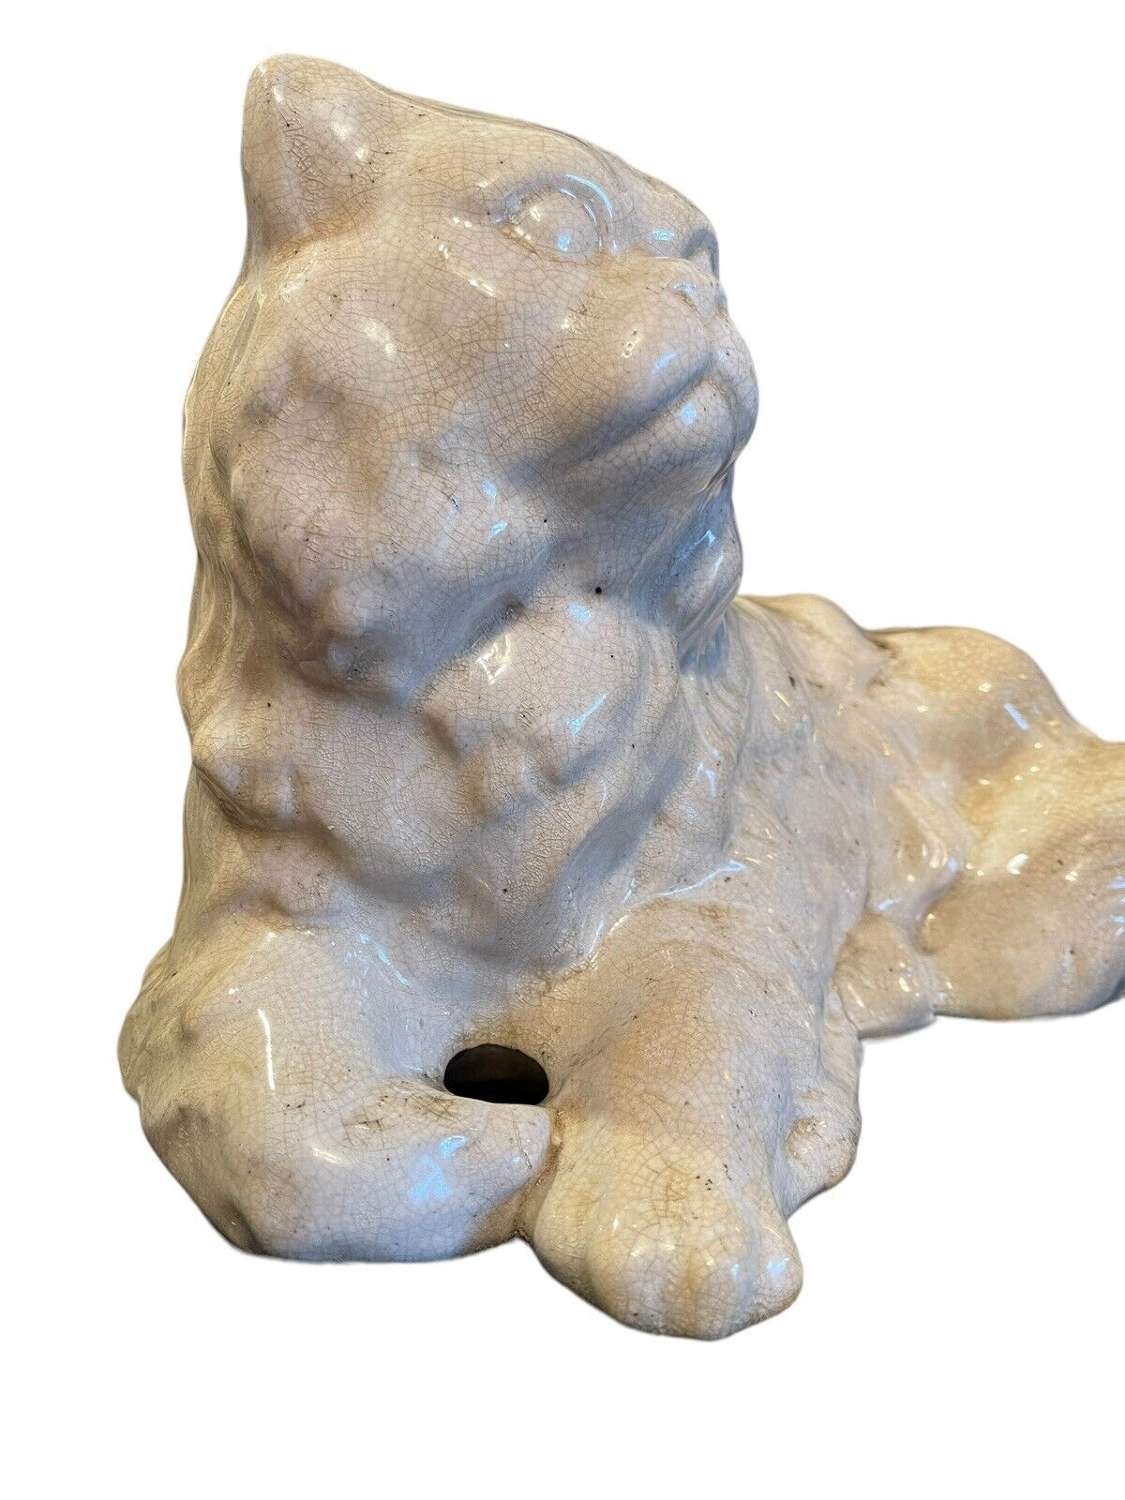 19th Century pottery sculpture of a reclining cat